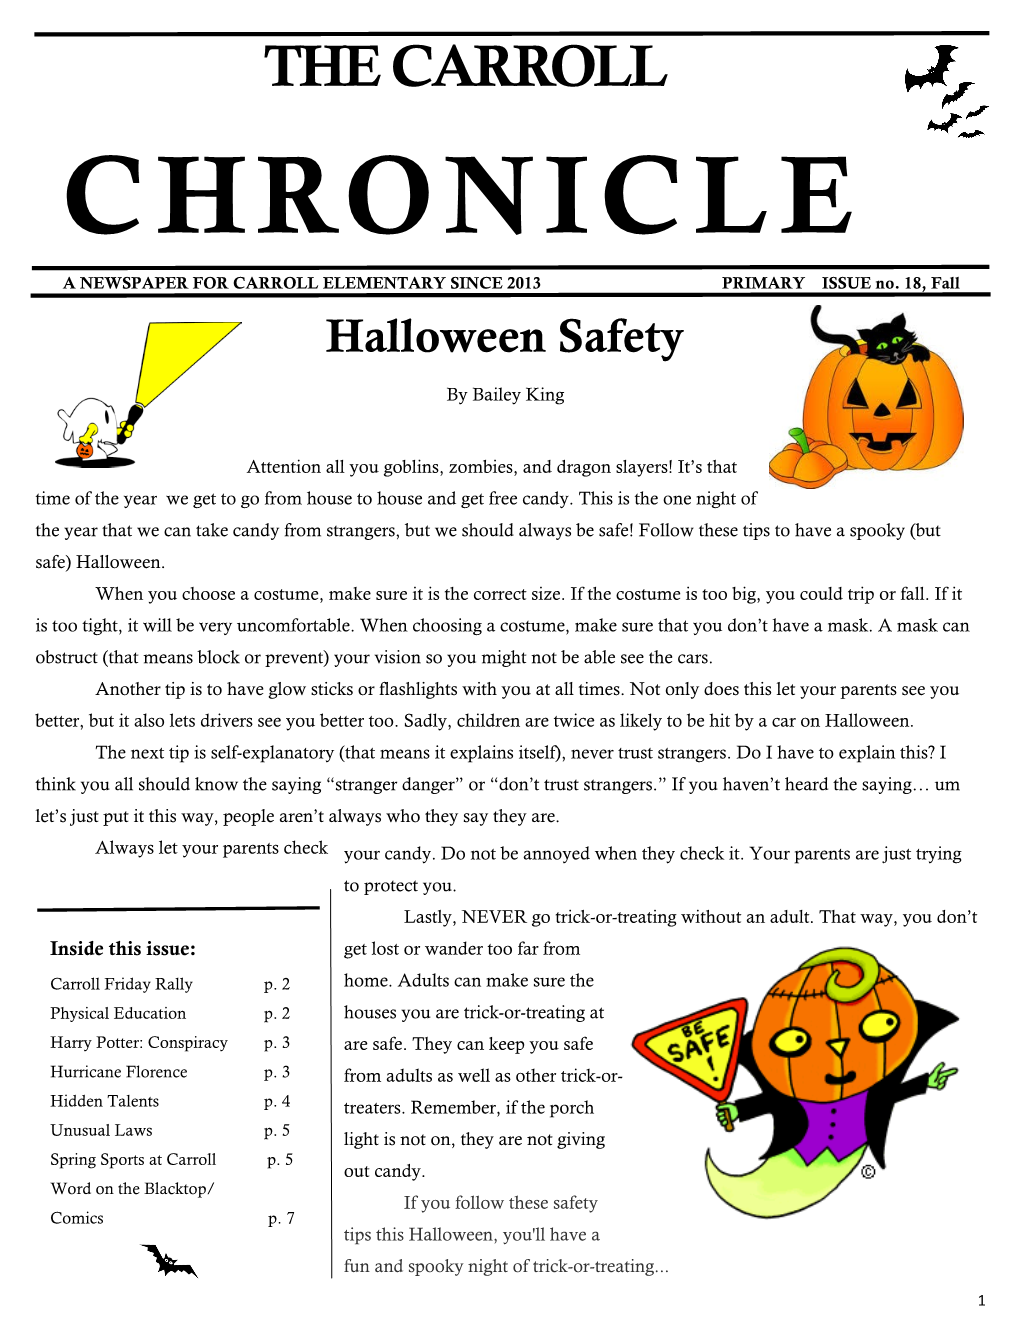 Chronicle Fall 2018-19 Primary